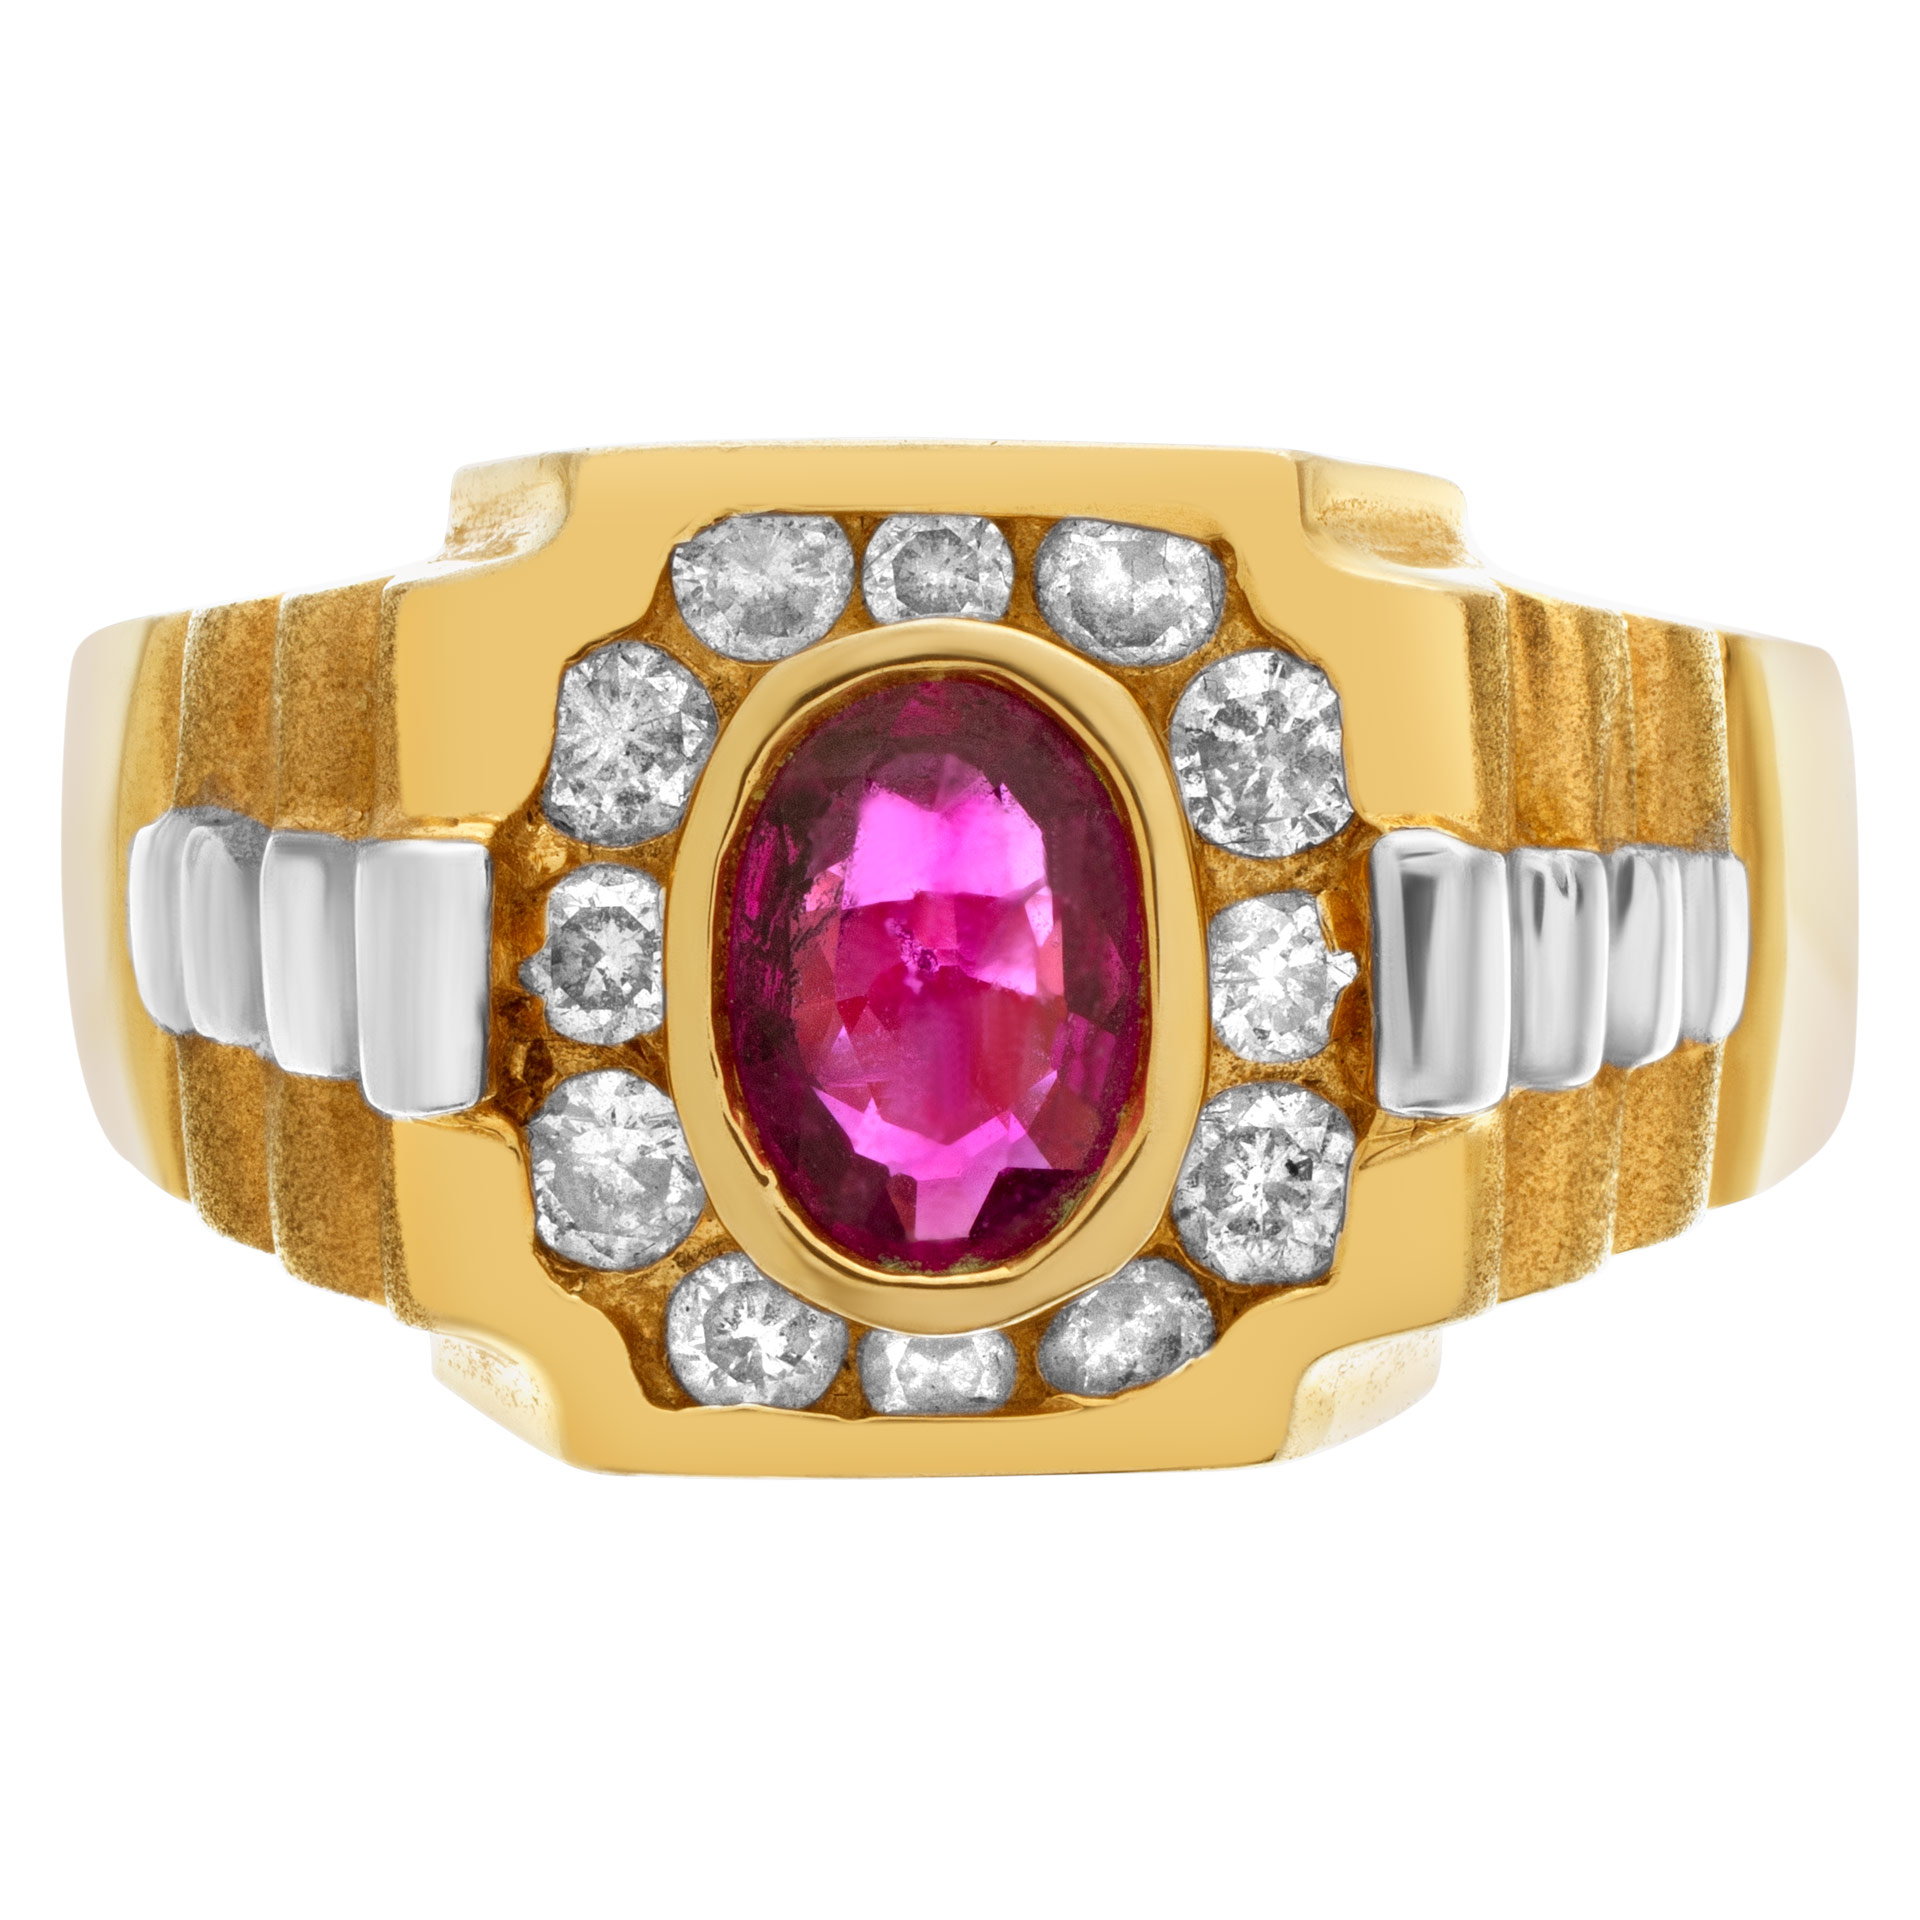 "President" style ring with oval ruby center accented with approximately 0.35 cts in diamonds